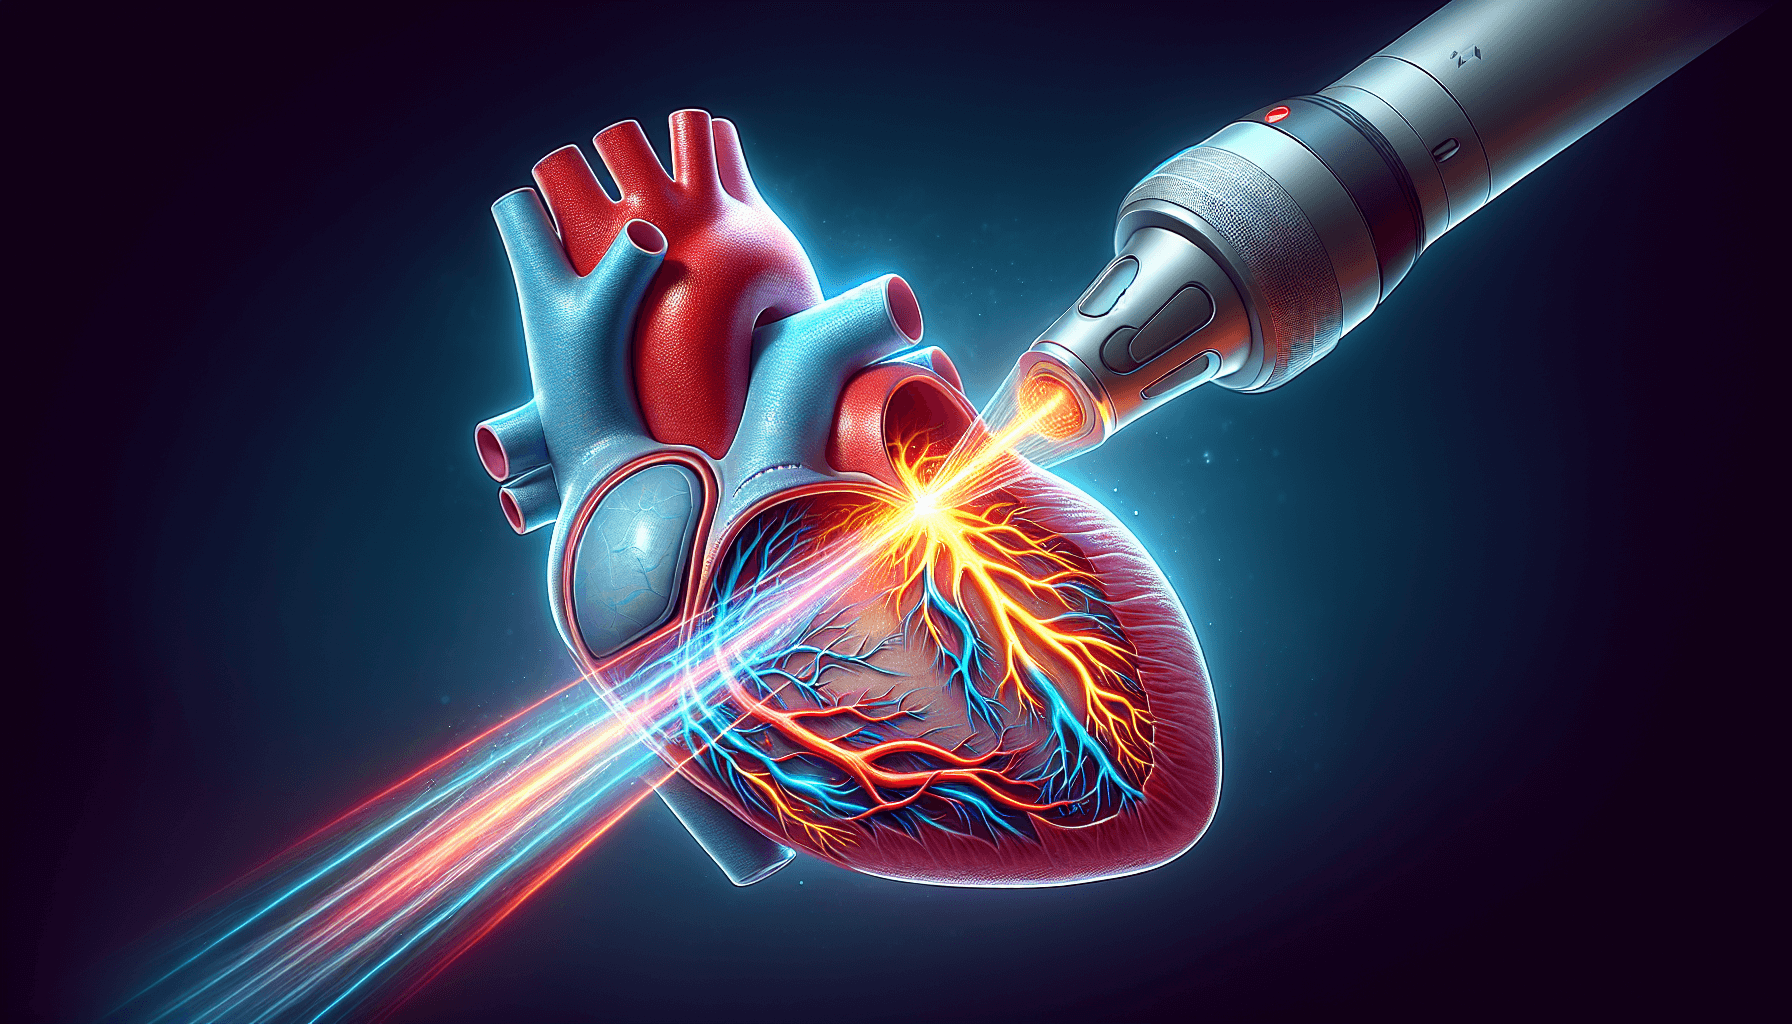 Illustration of Pulsed Field Ablation (PFA) procedure, learn about the latest treatments for atrial fibrillation